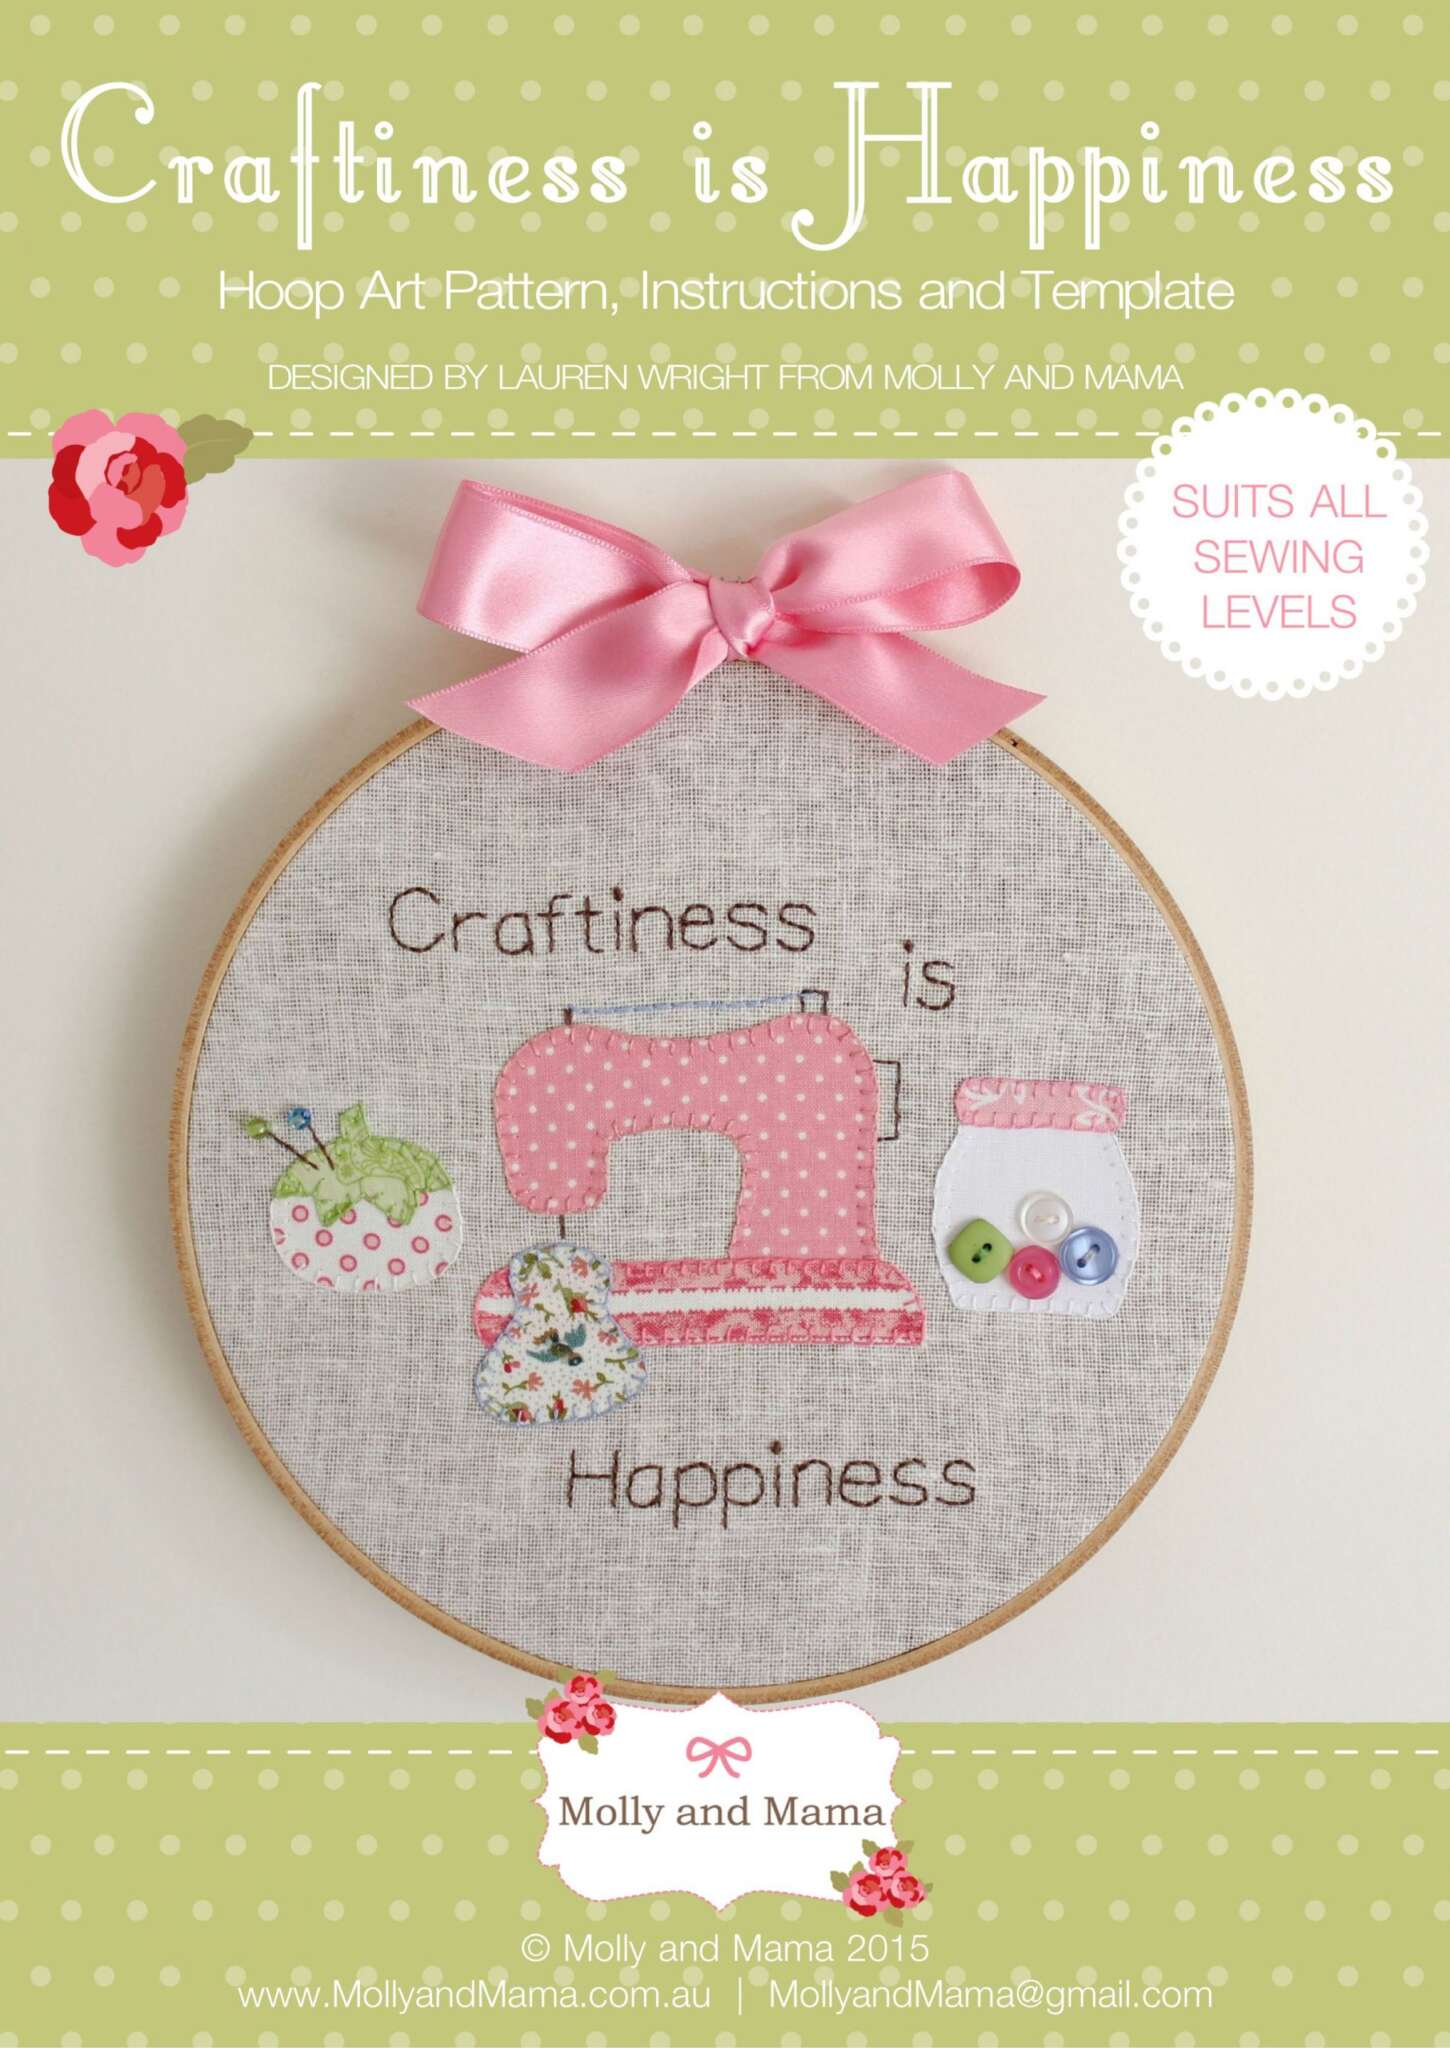 Welcome and Intro to Free Sewing Class - Oh You Crafty Gal